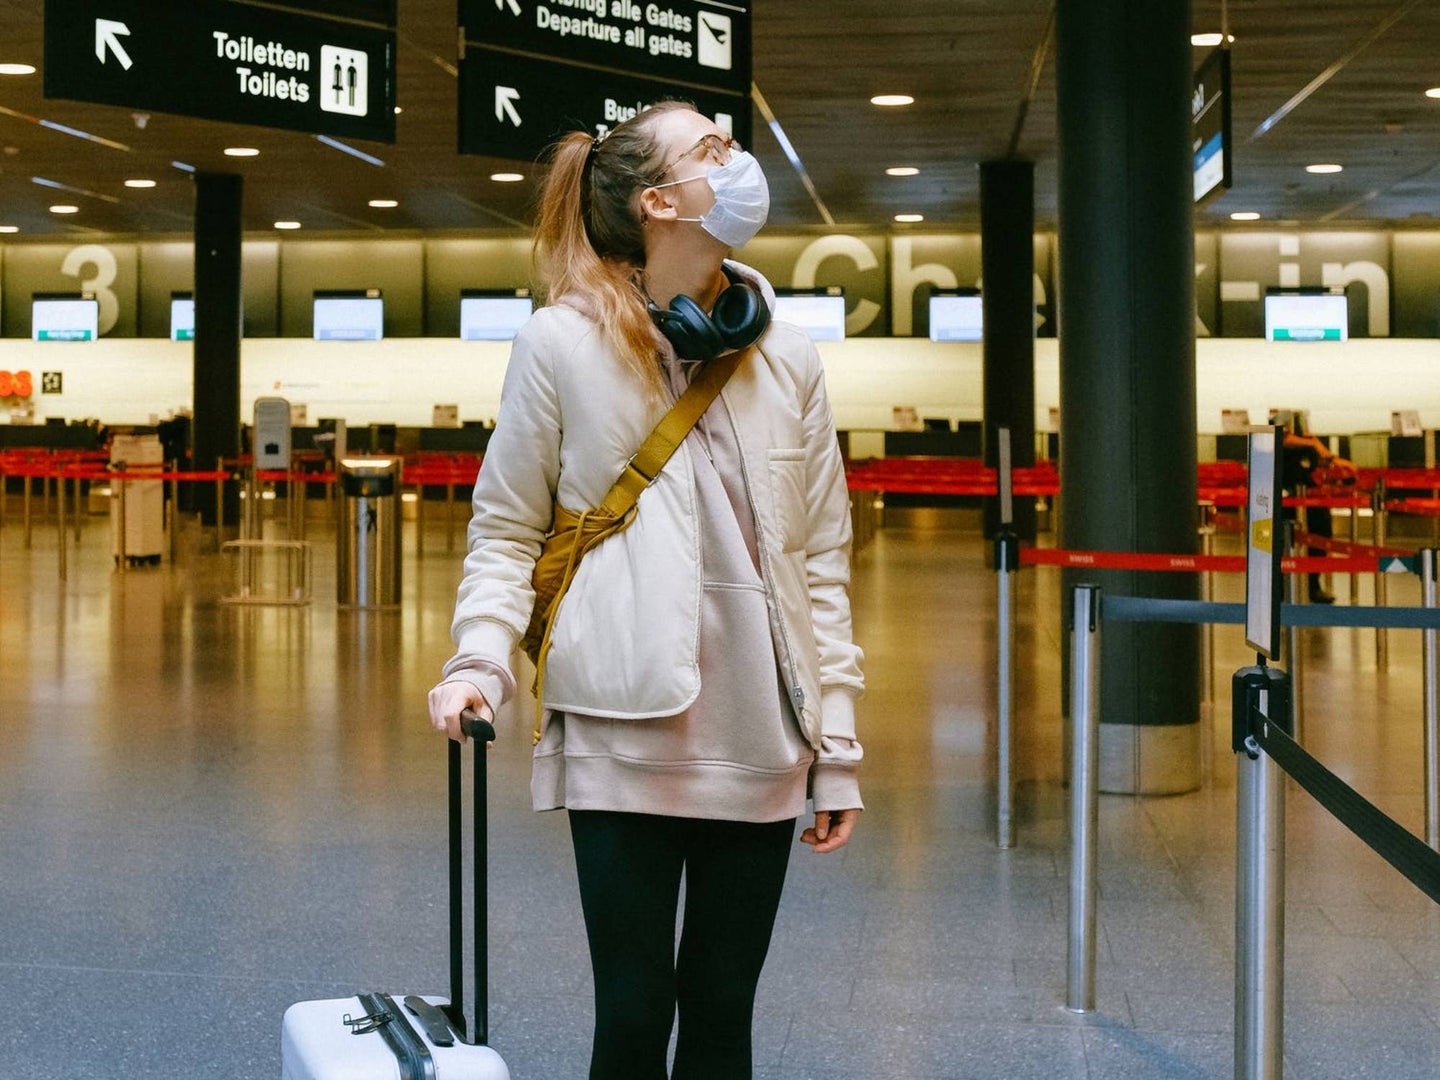 A blonde person wearing a medical face mask and standing in a mostly empty airport while holding onto a white rolling suitcase.